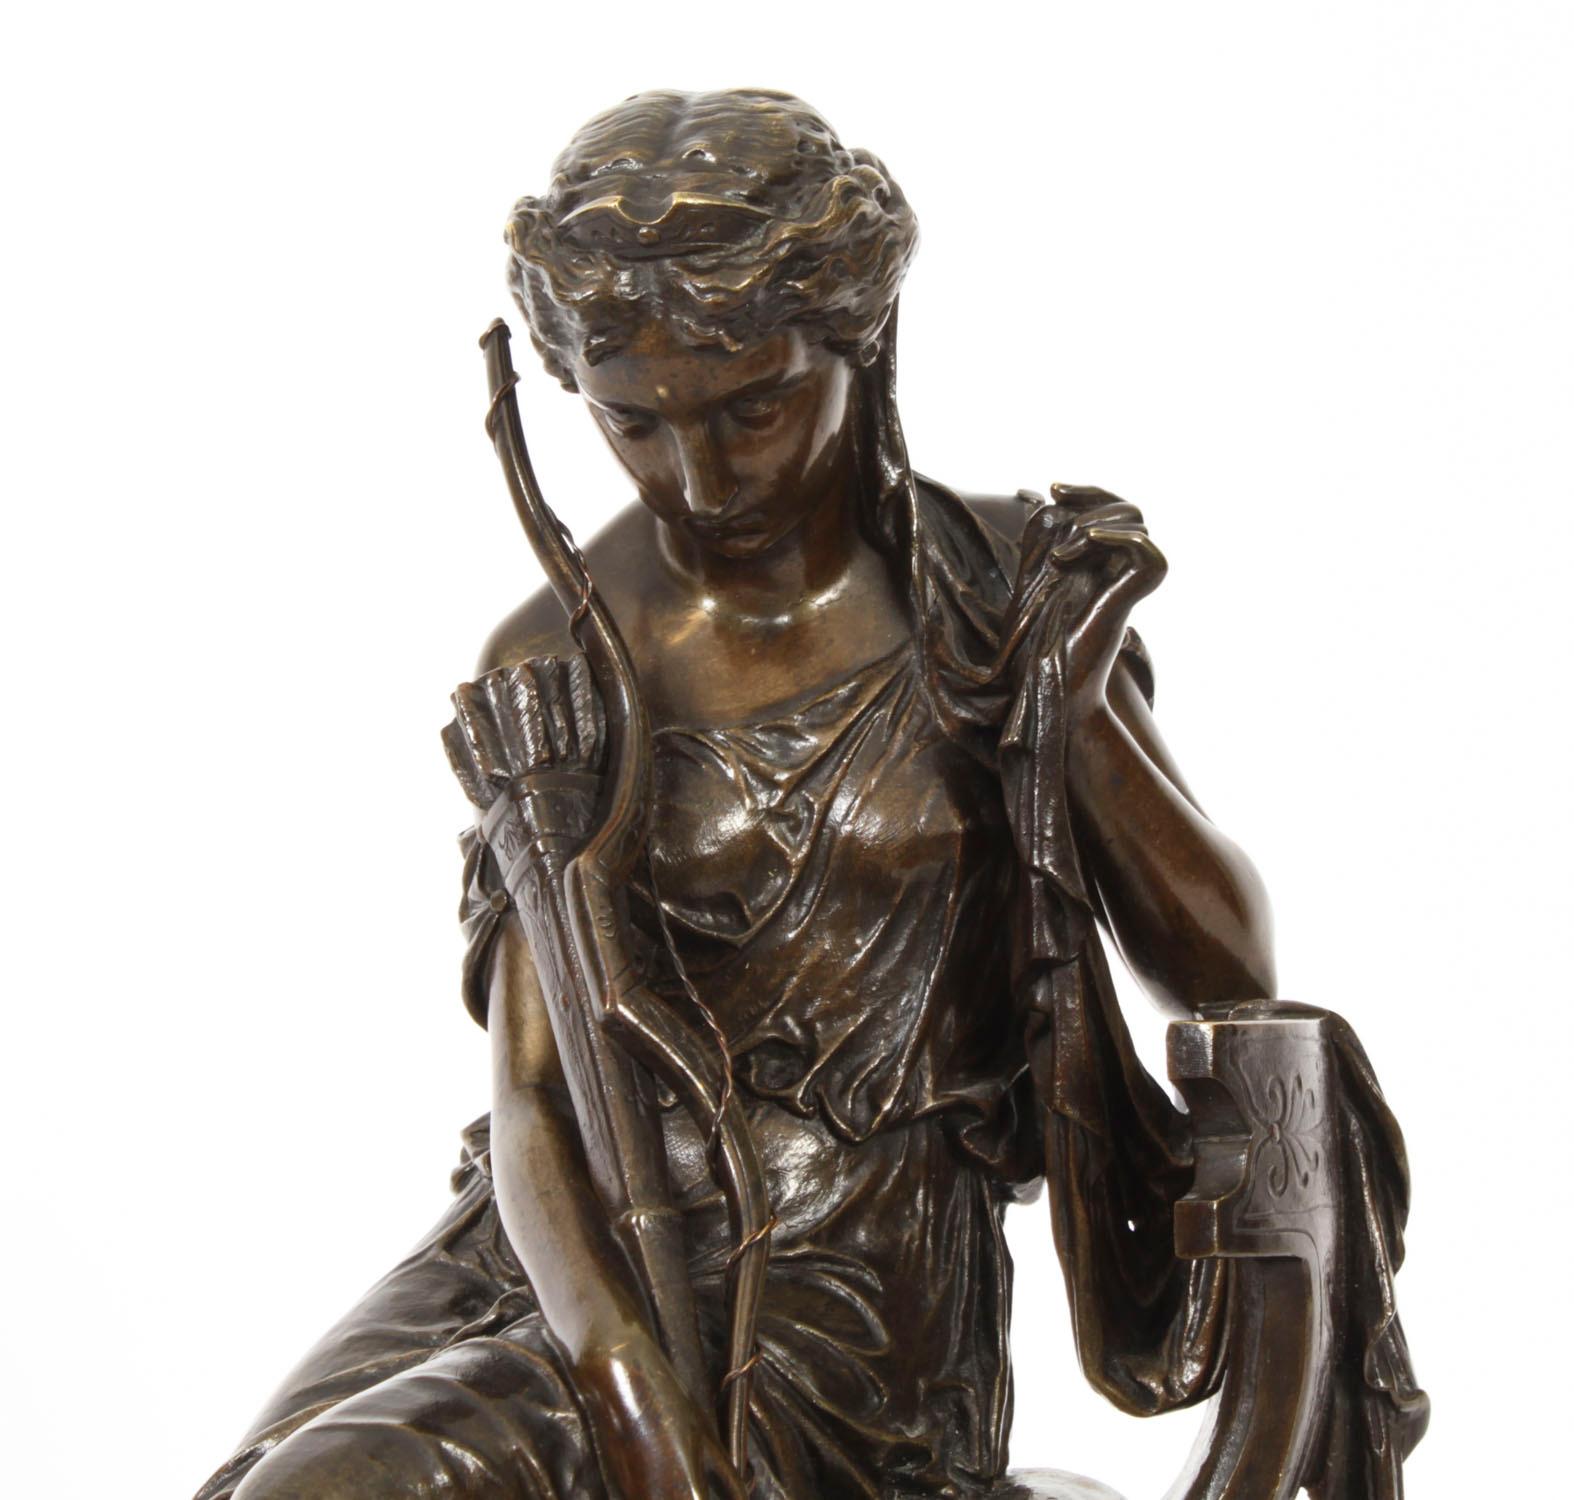 An  elegant French Grand Tour bronze figure of the Greek Goddess Diana by Marius-Jean-Antonin Mercié, French 1845 - 1916,  dating from Circa 1880.

The seated and robed Goddess Diana is holding a bow and arrows  with her head downcast and raised on